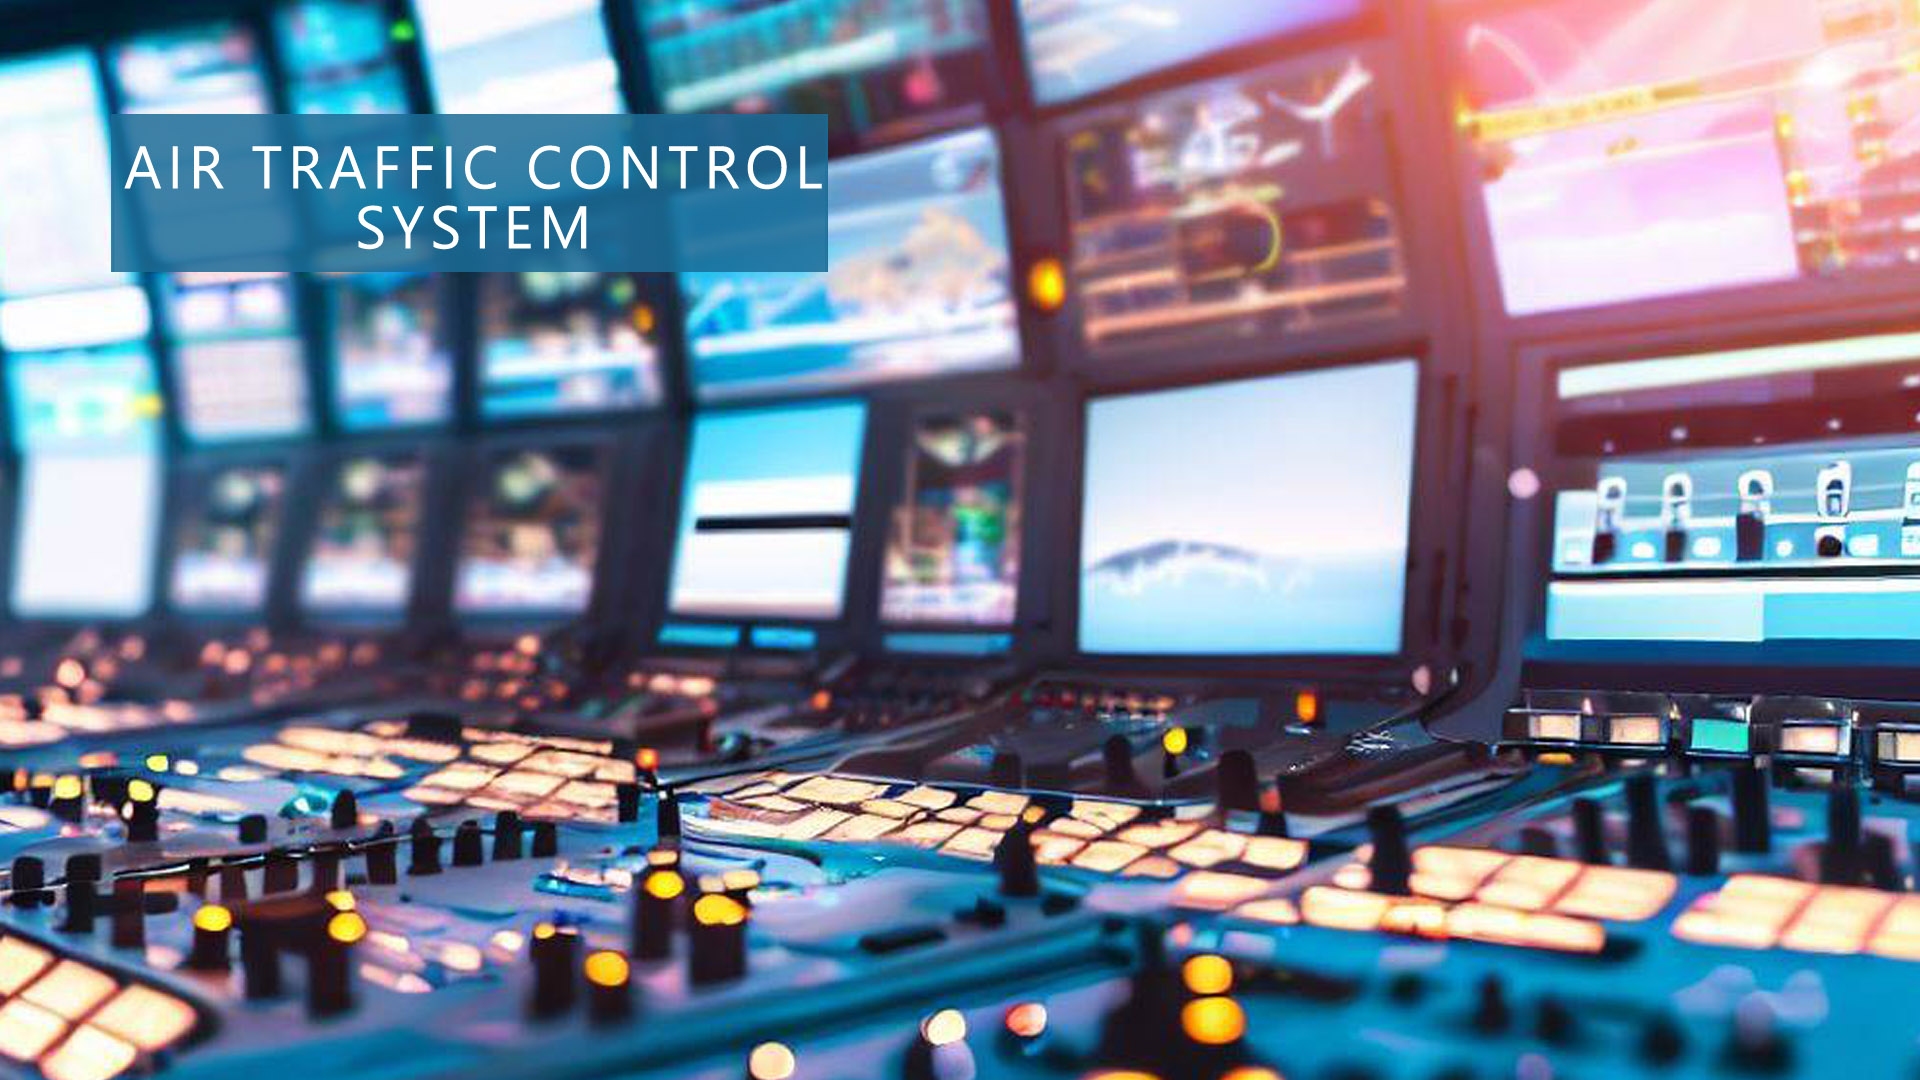 Airtraffic control systems